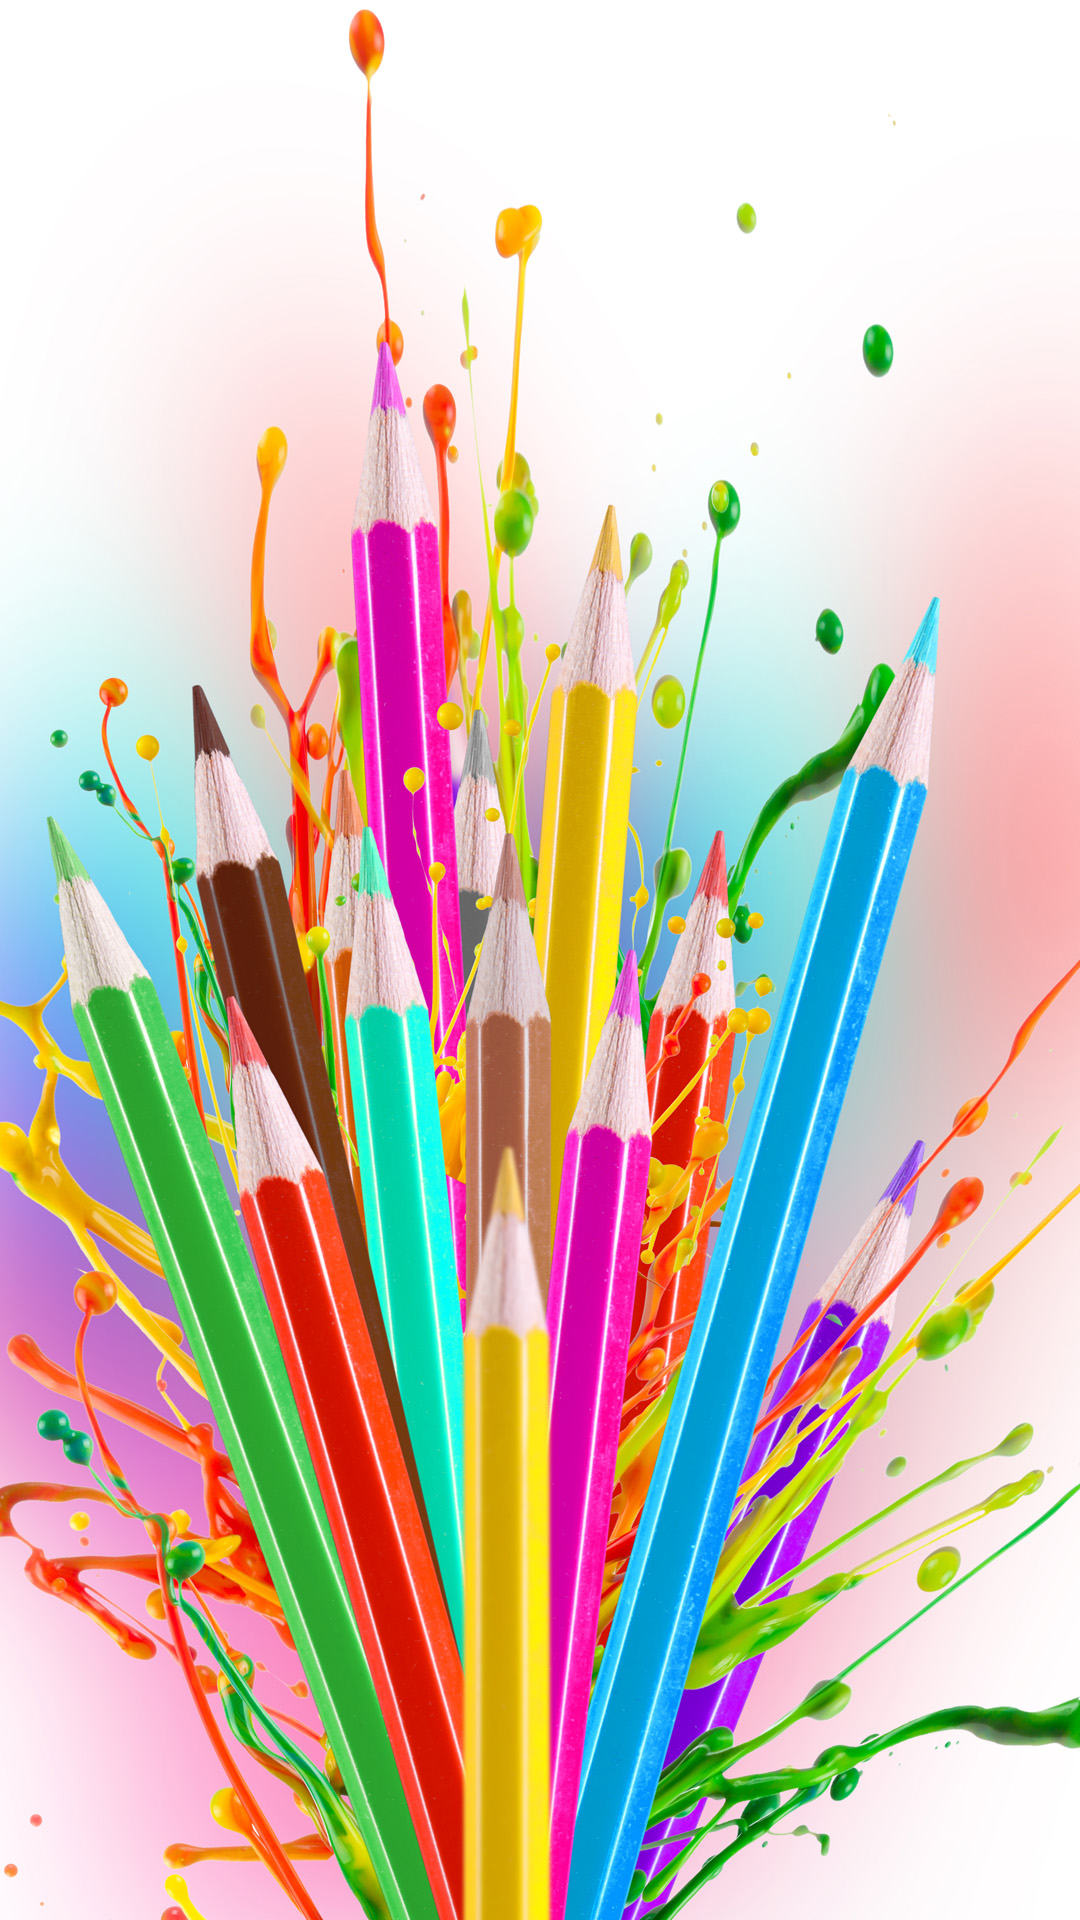 wallpaper art design,drinking straw,colorfulness,pencil,party supply,graphic design